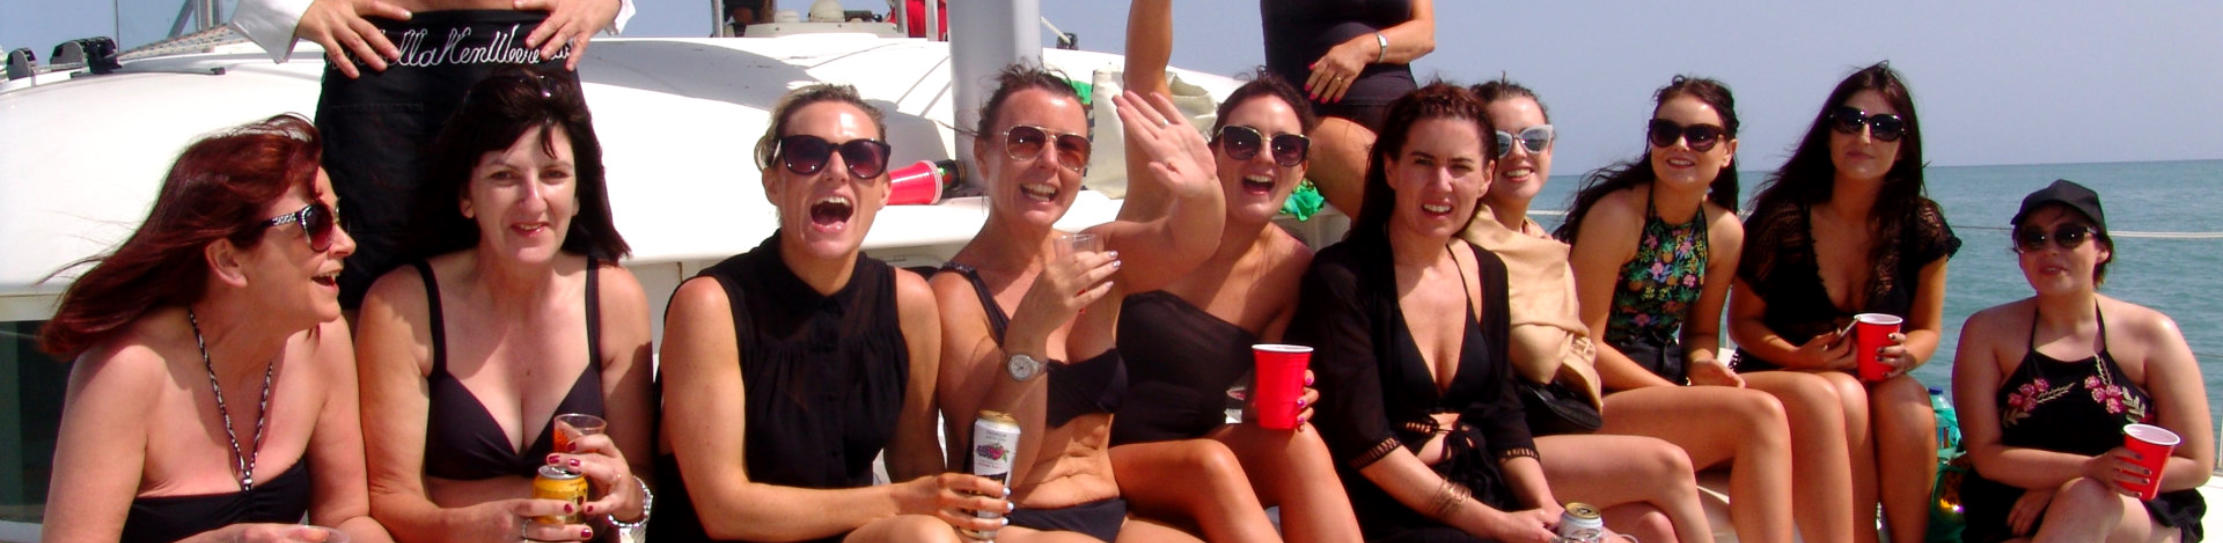 Hen party boat cruise Spain